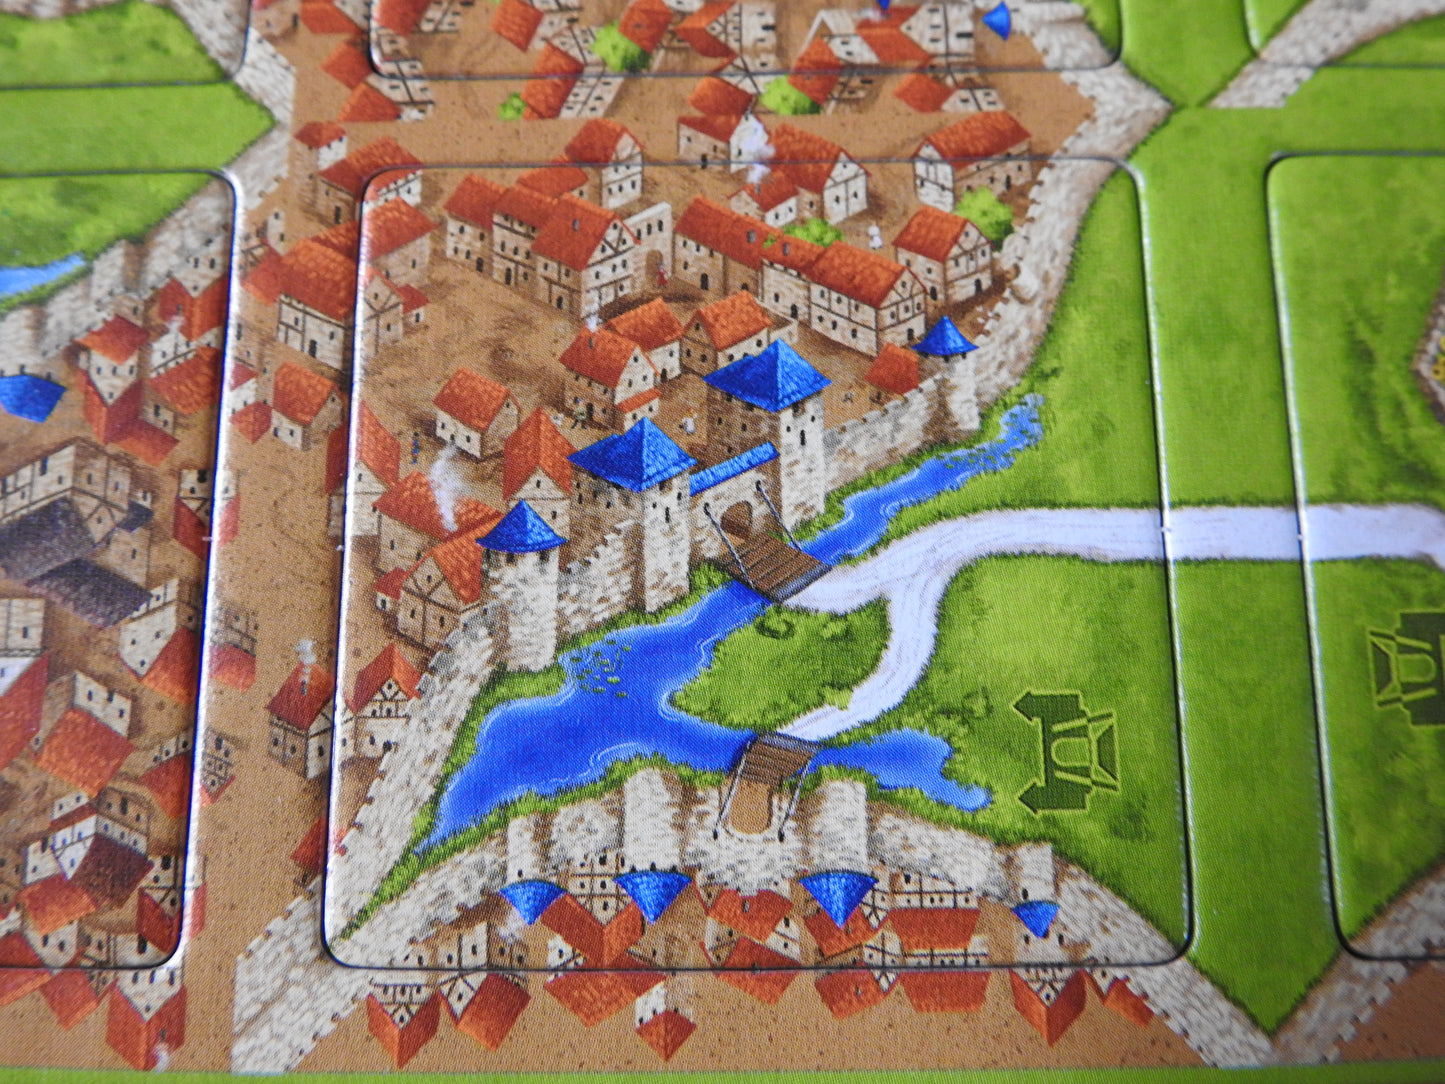 Close-up view of one of the beautiful tiles, featuring a beatiful drawbridge across a moat to the city in this Carcassonne Drawbridges mini expansion.